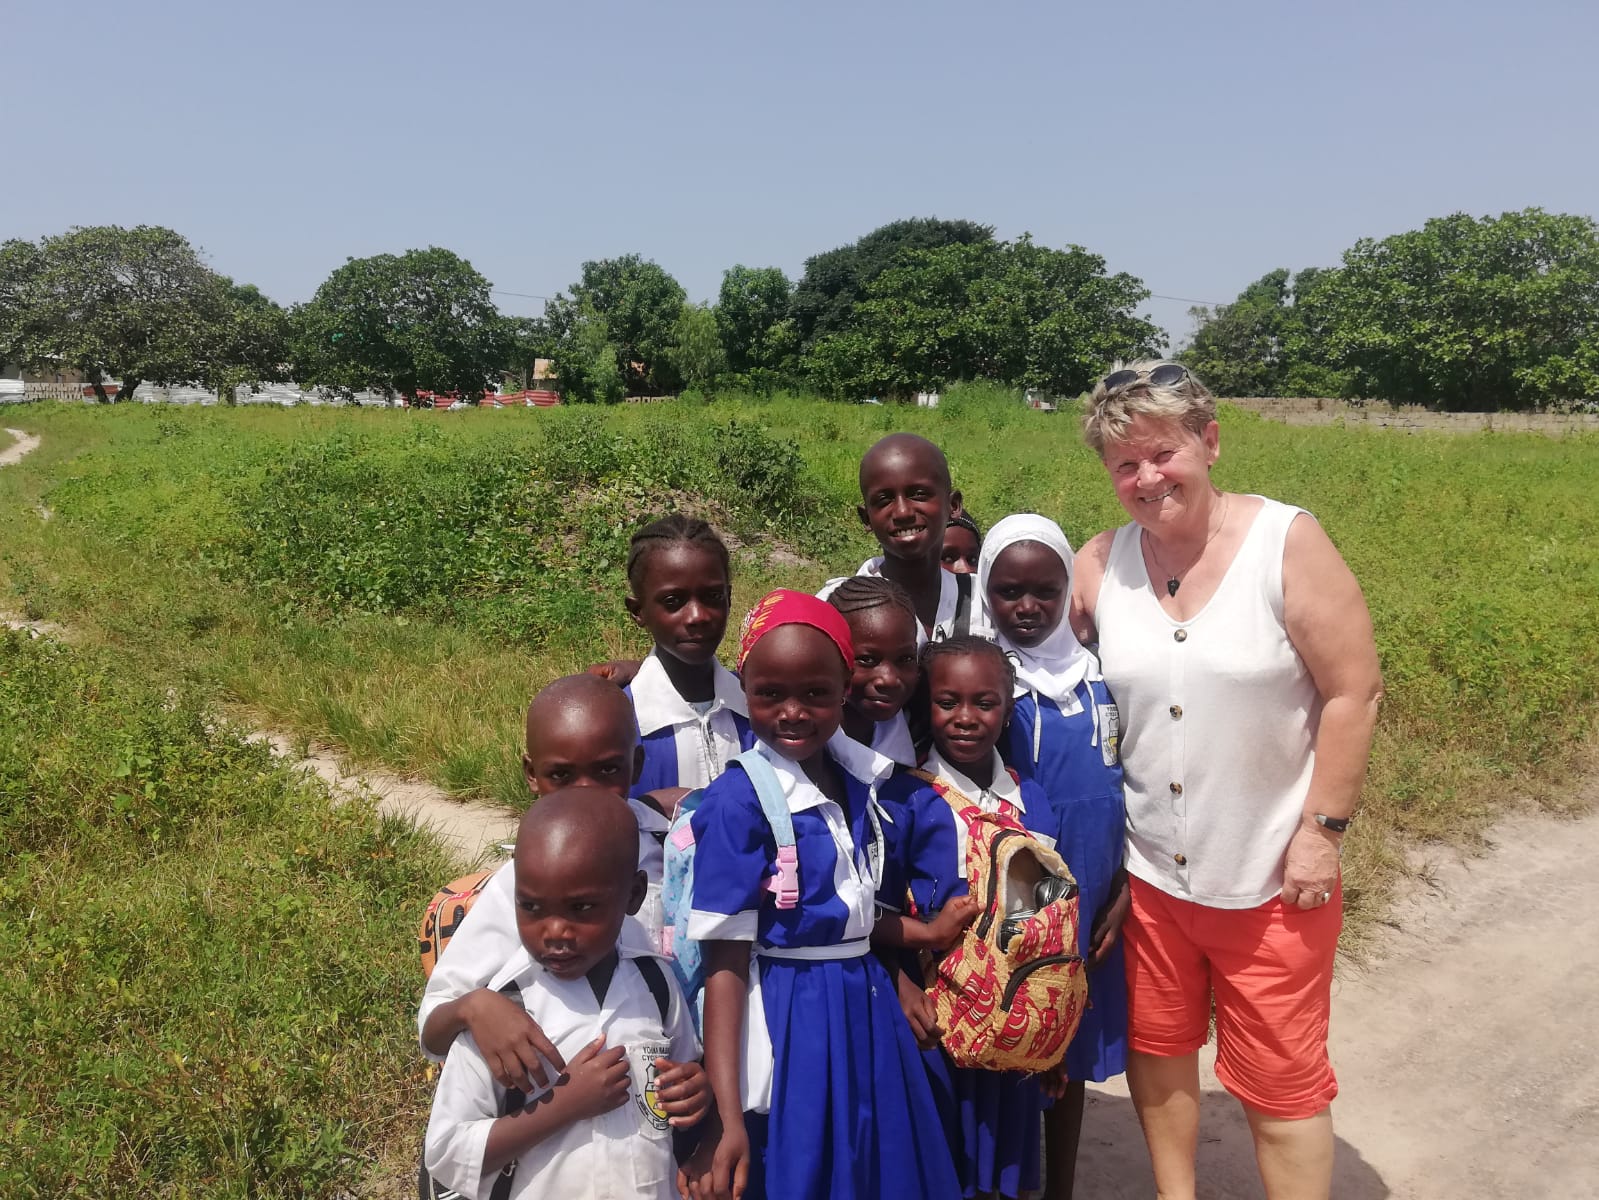 Update 21-10-19: News from Gambia